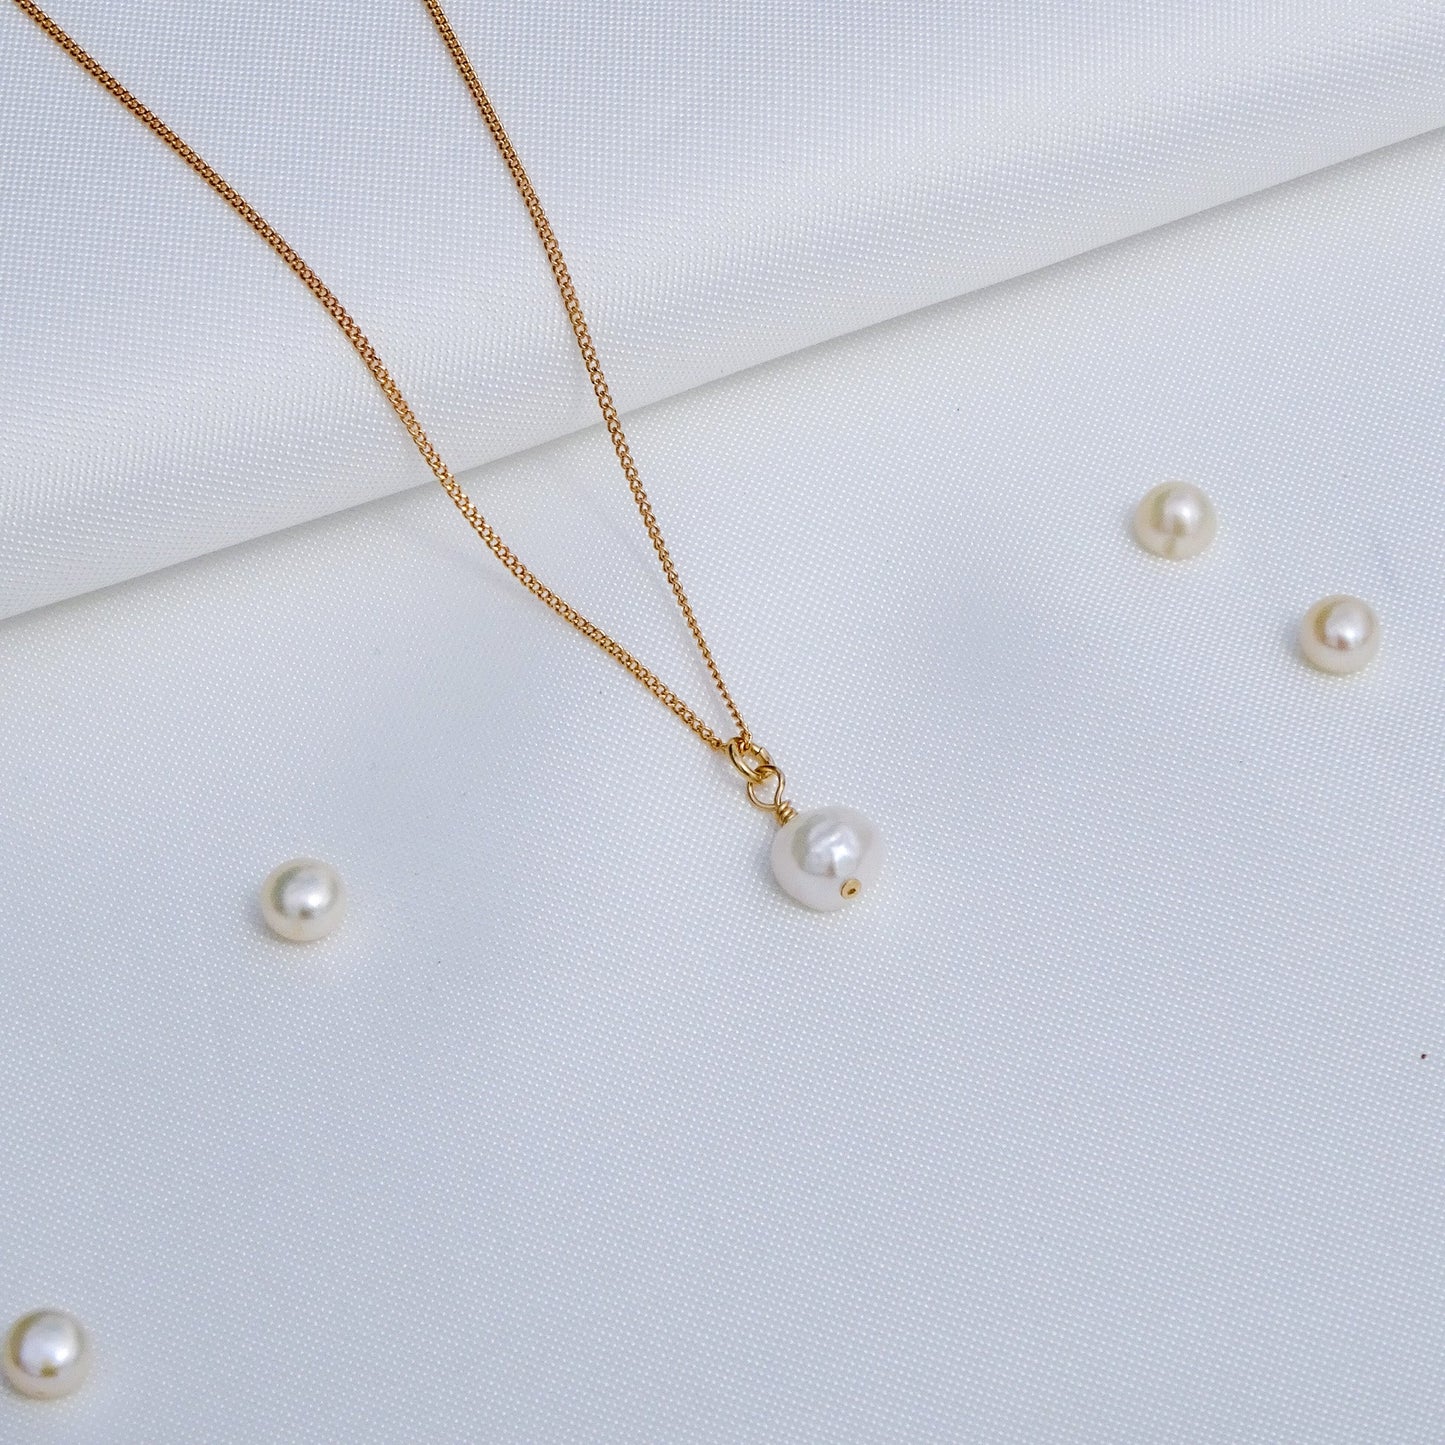 Gold Pearl Necklace, Small Pearl Pendant, Pearl Gift, Single Pearl, Simple  Pearl, Wedding Necklace, Bridesmaid Necklace, Pearl Jewelry -  Canada